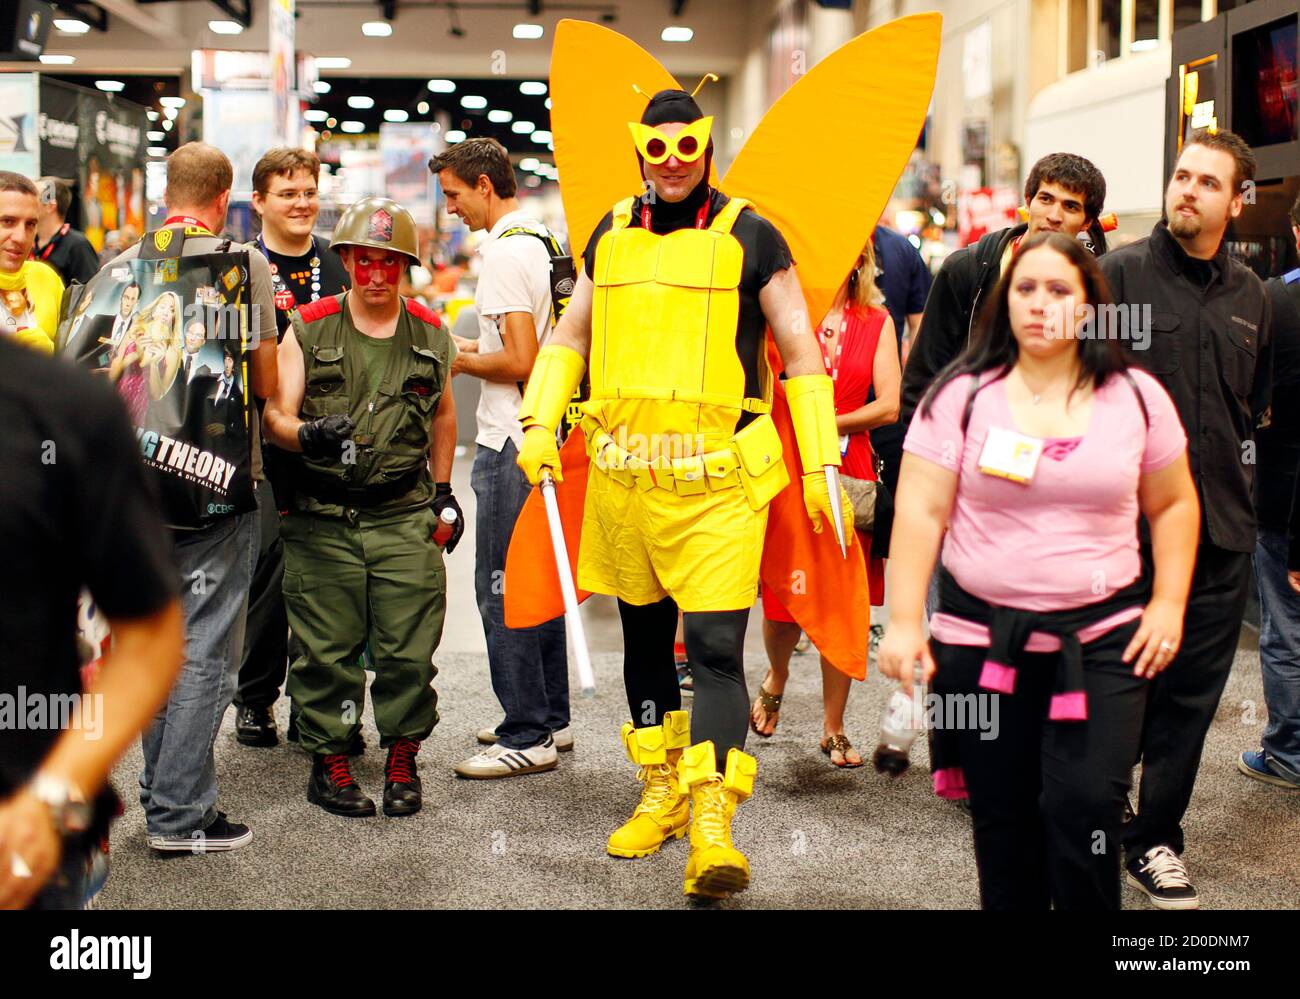 An attendee dressed in costume walks the Comic Con convention floor during the pop culture event in San Diego, California July 22, 2011.  REUTERS/Mike Blake (UNITED STATES - Tags: ENTERTAINMENT SOCIETY) Stock Photo